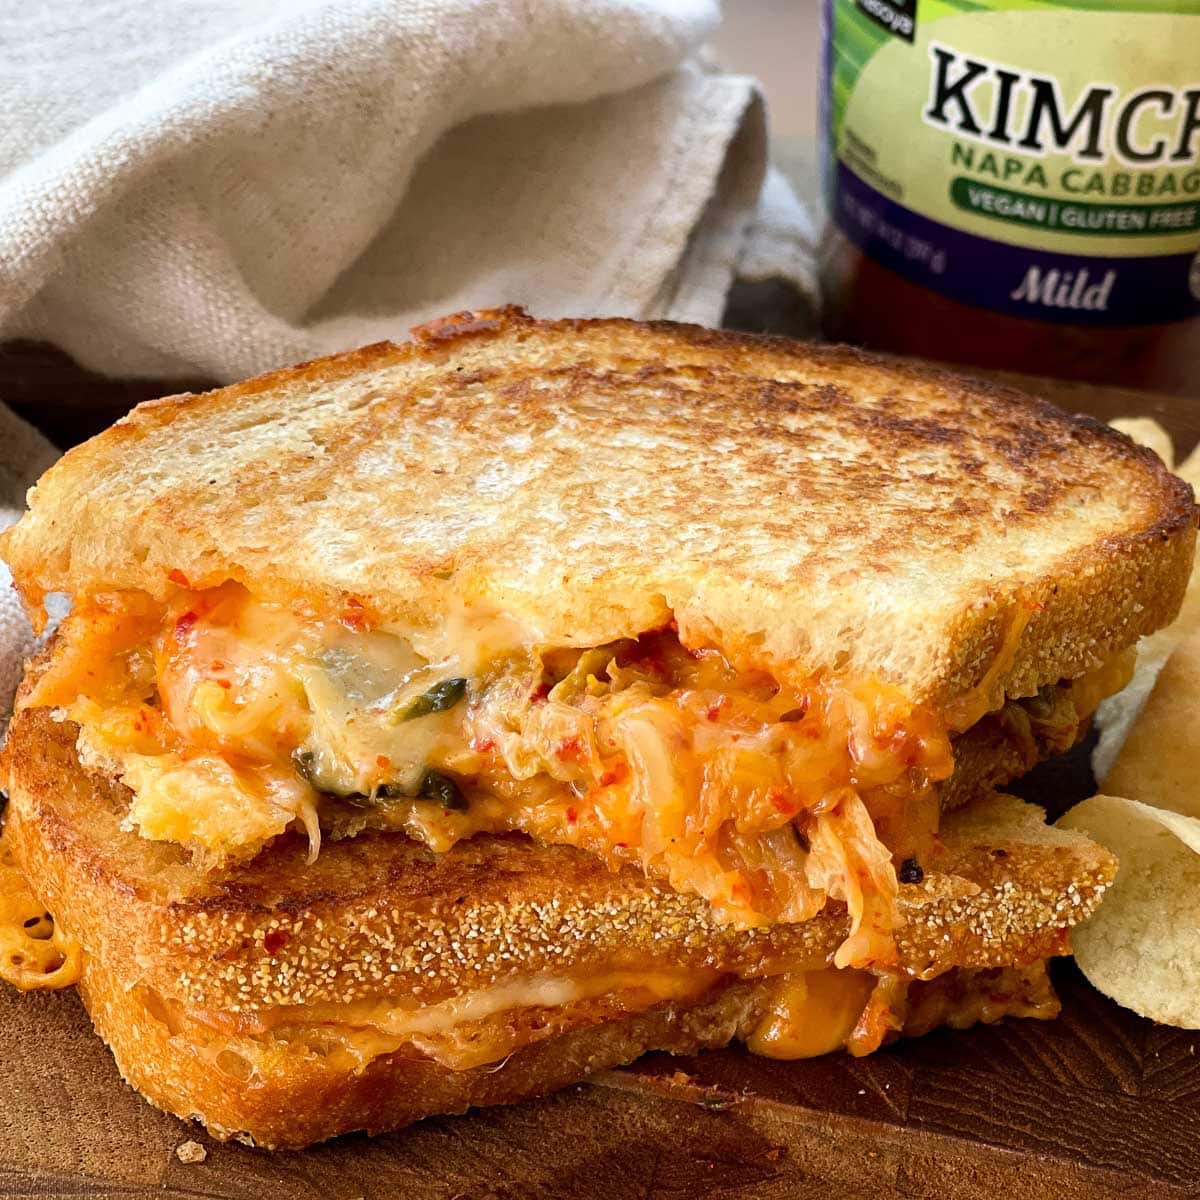 A stacked kimchi grilled cheese sandwich on a wooden board with a jar of kimchi and potato chips on the side.